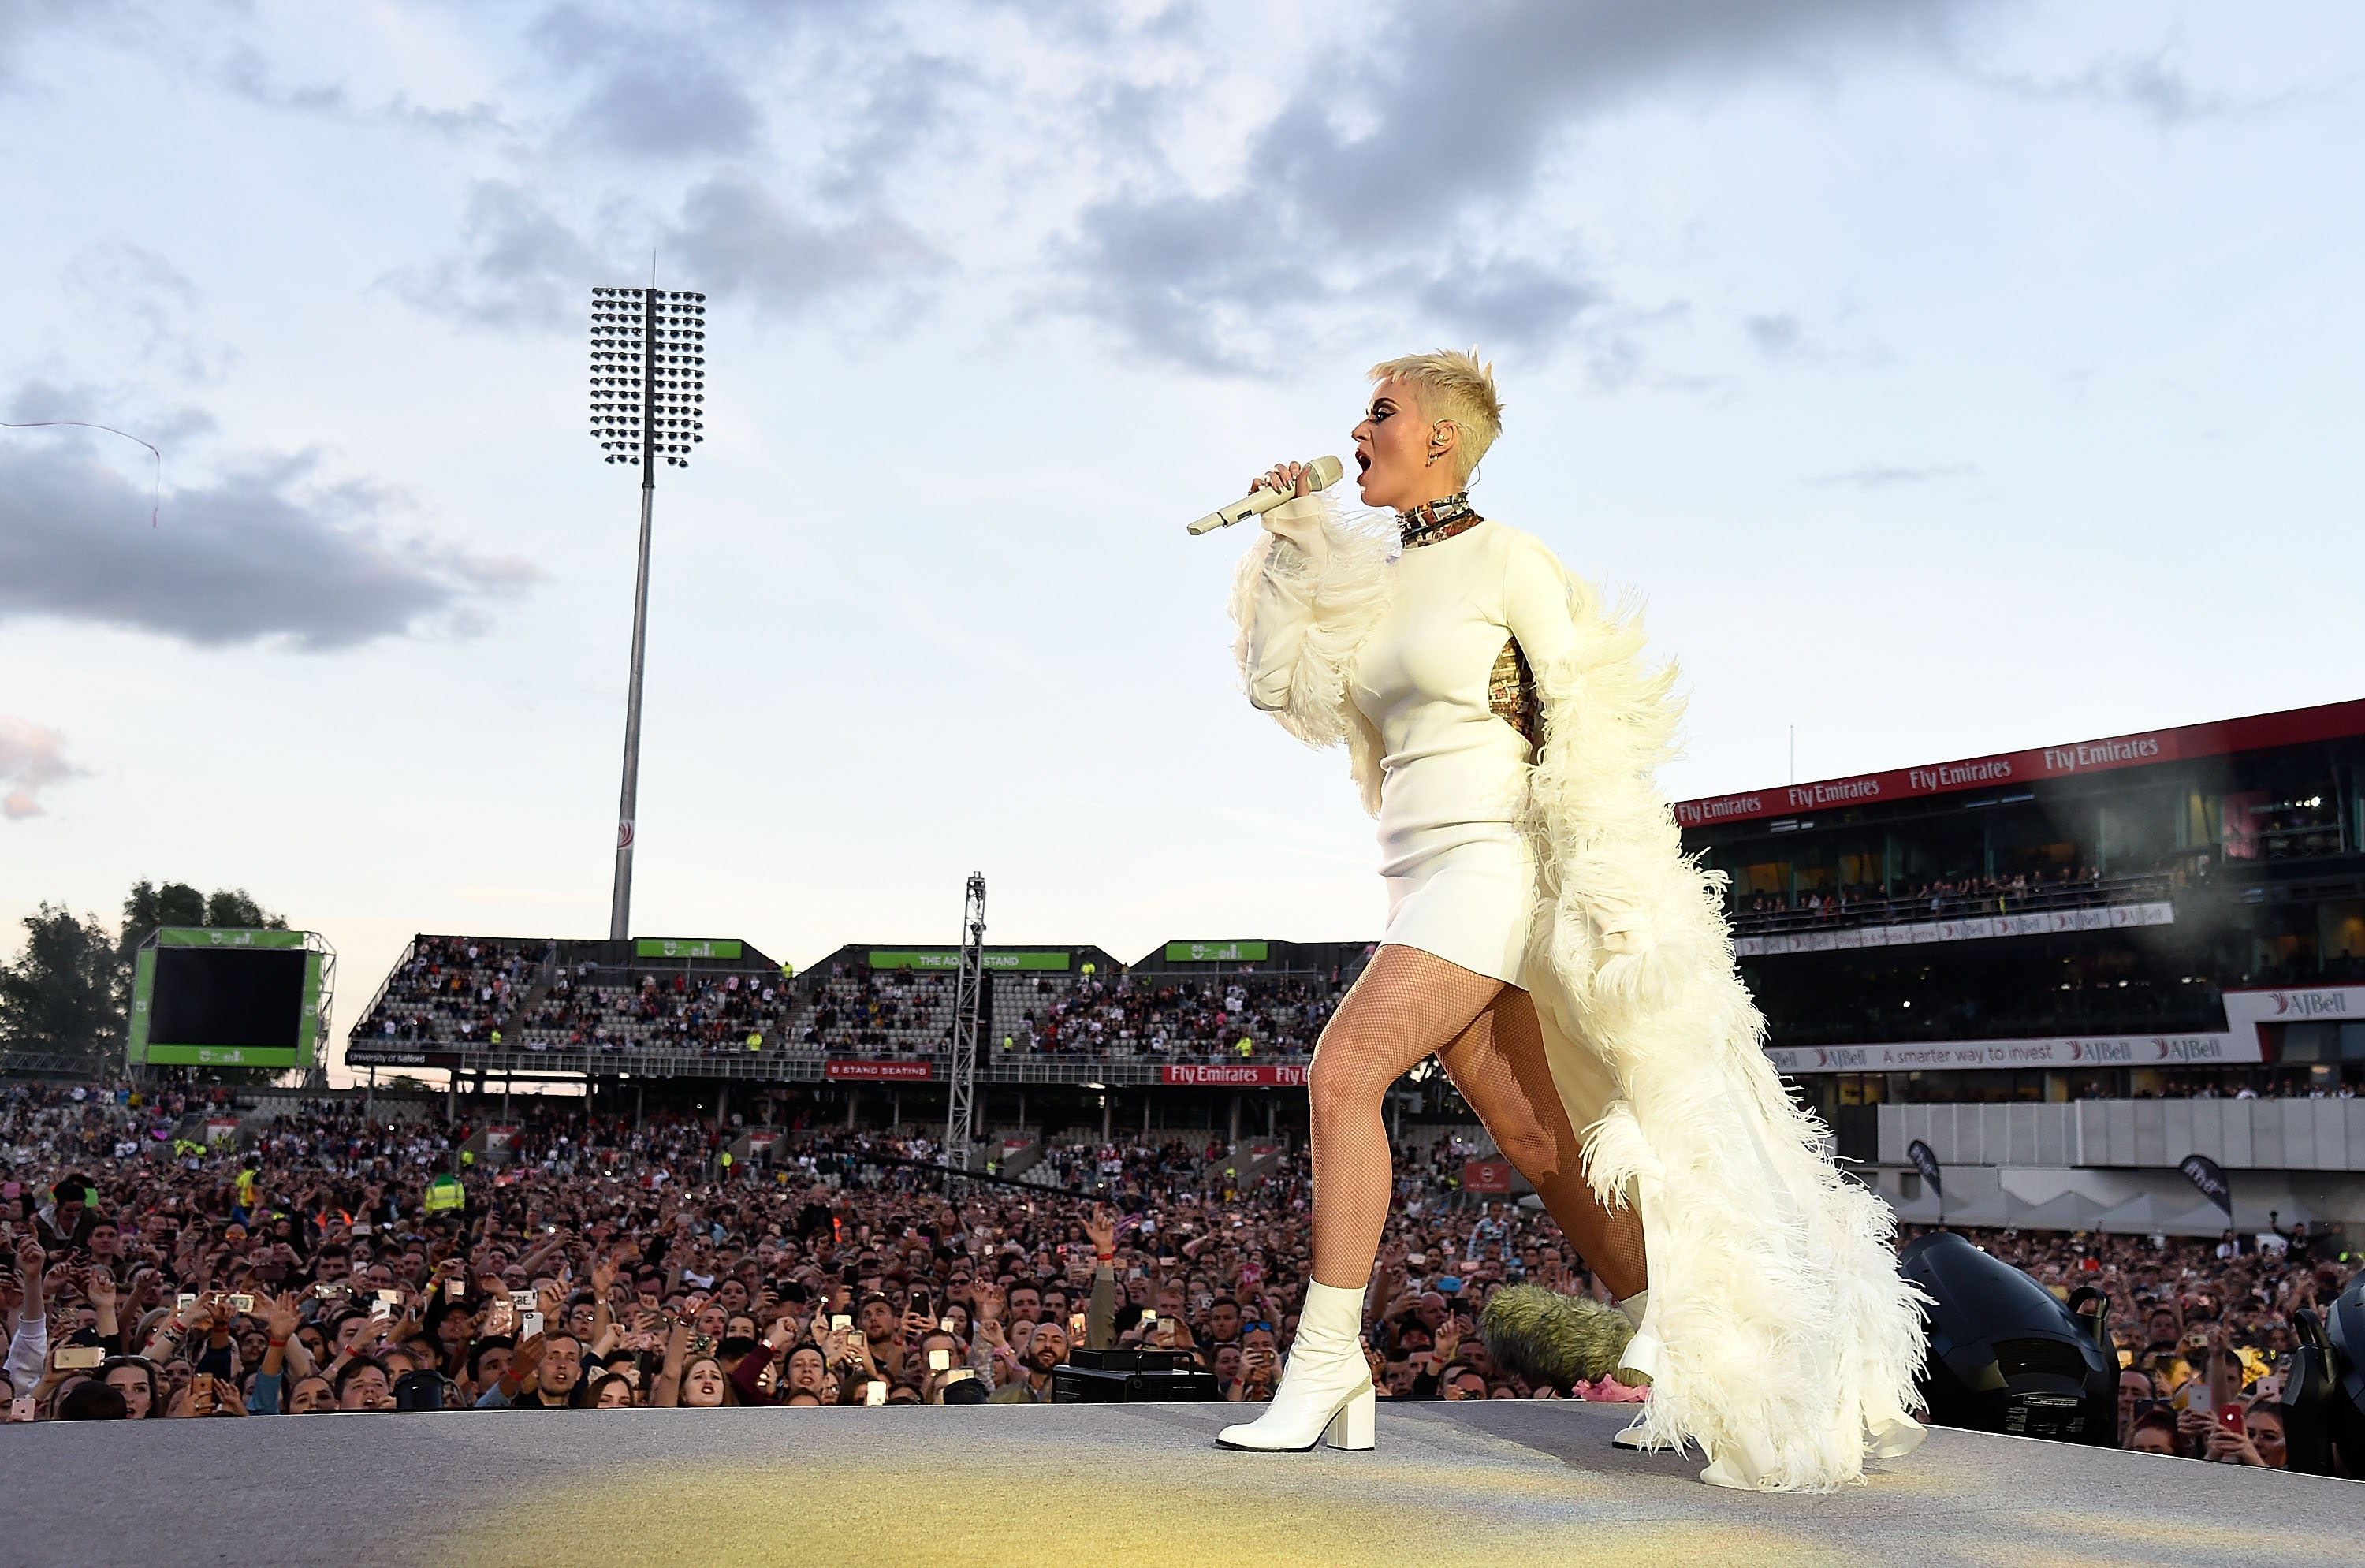 Katy Perry performs on stage during the One Love Manchester Benefit Concert at Old Trafford Cricket Ground on June 4, 2017 in Manchester, England. (Kevin Mazur/One Love Manchester—Getty Images)